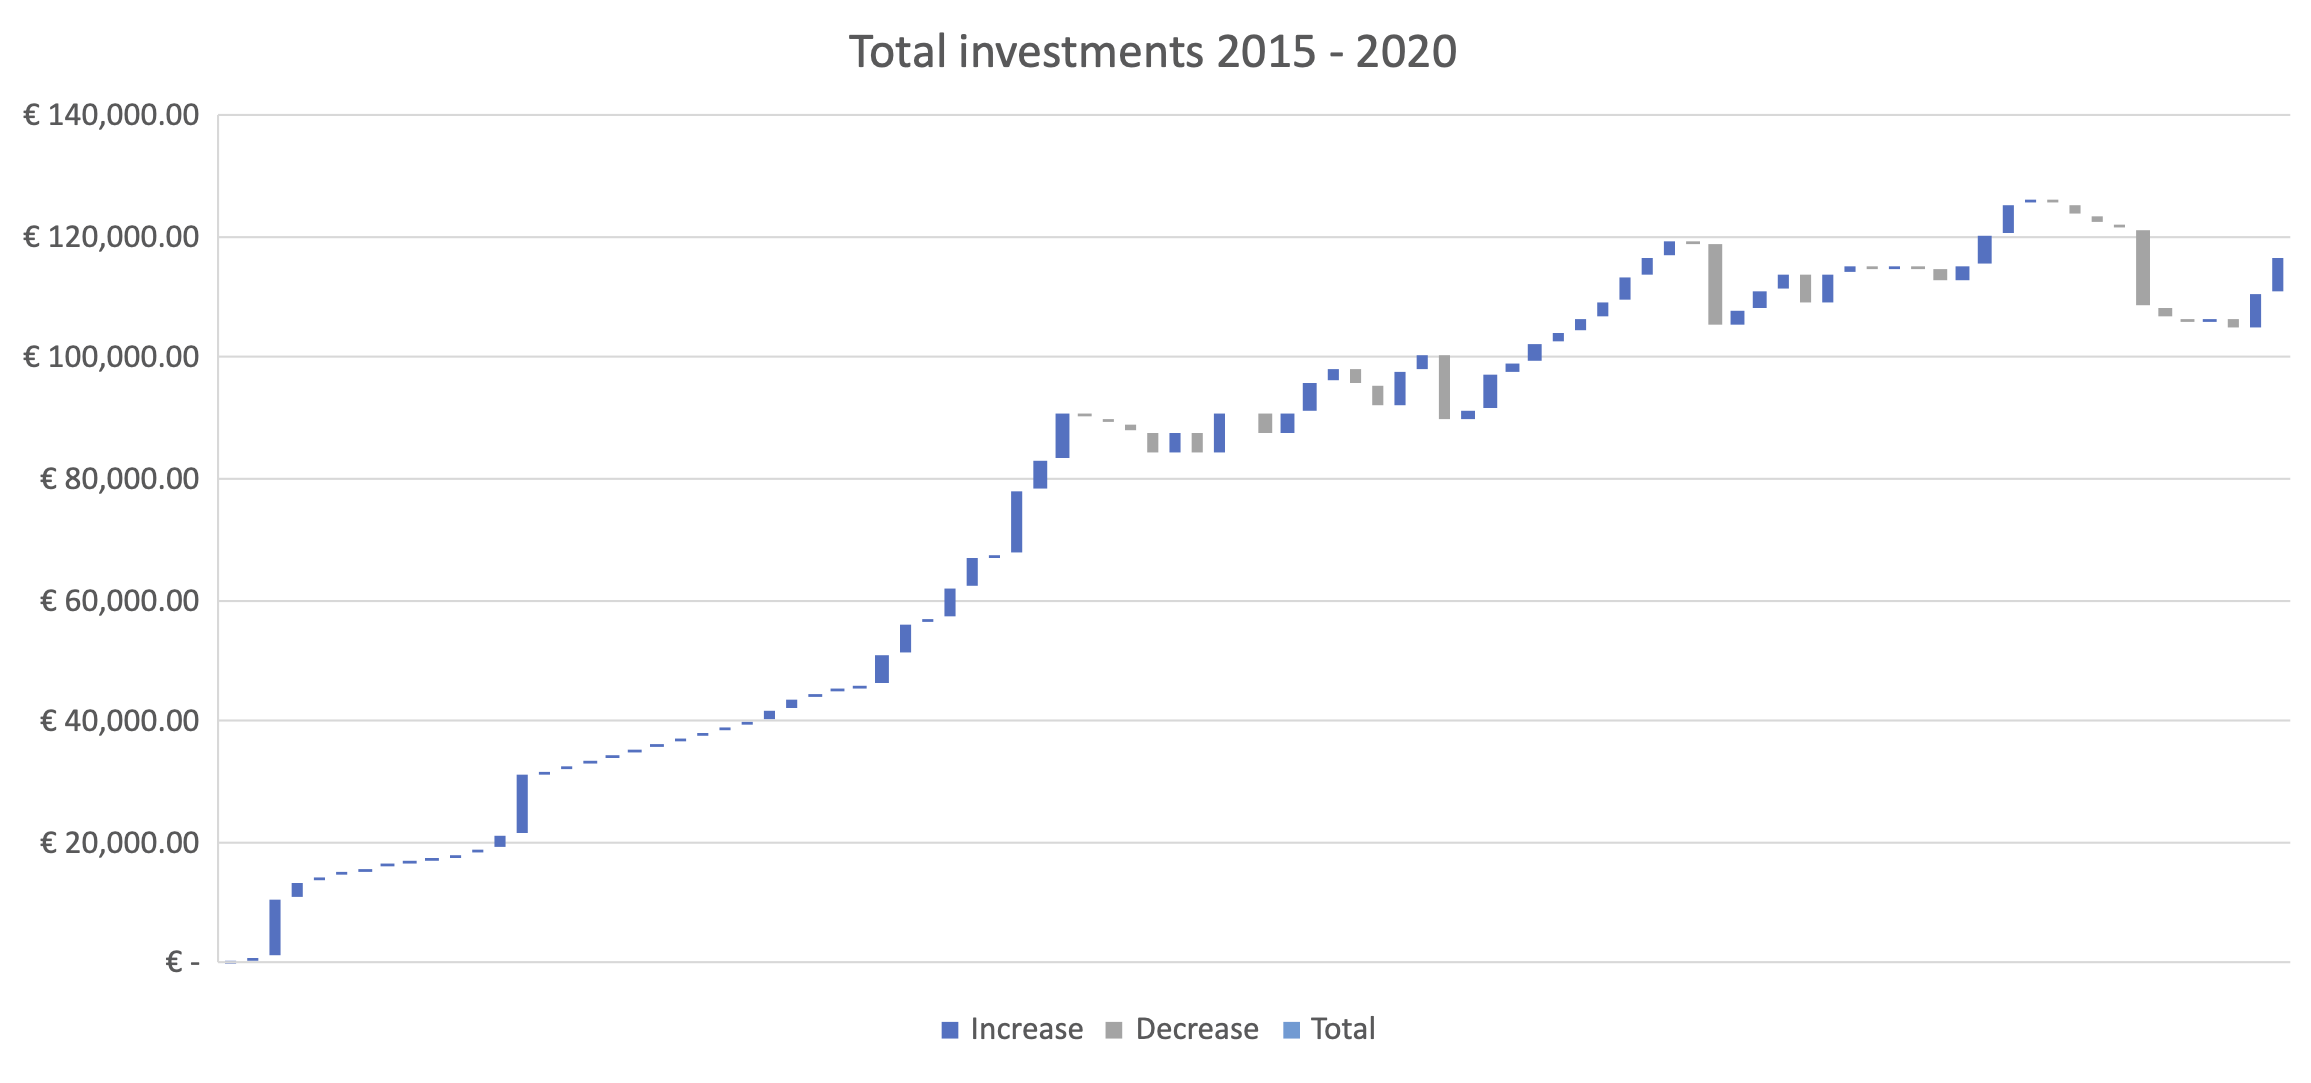 Total investments 2015 - 2020